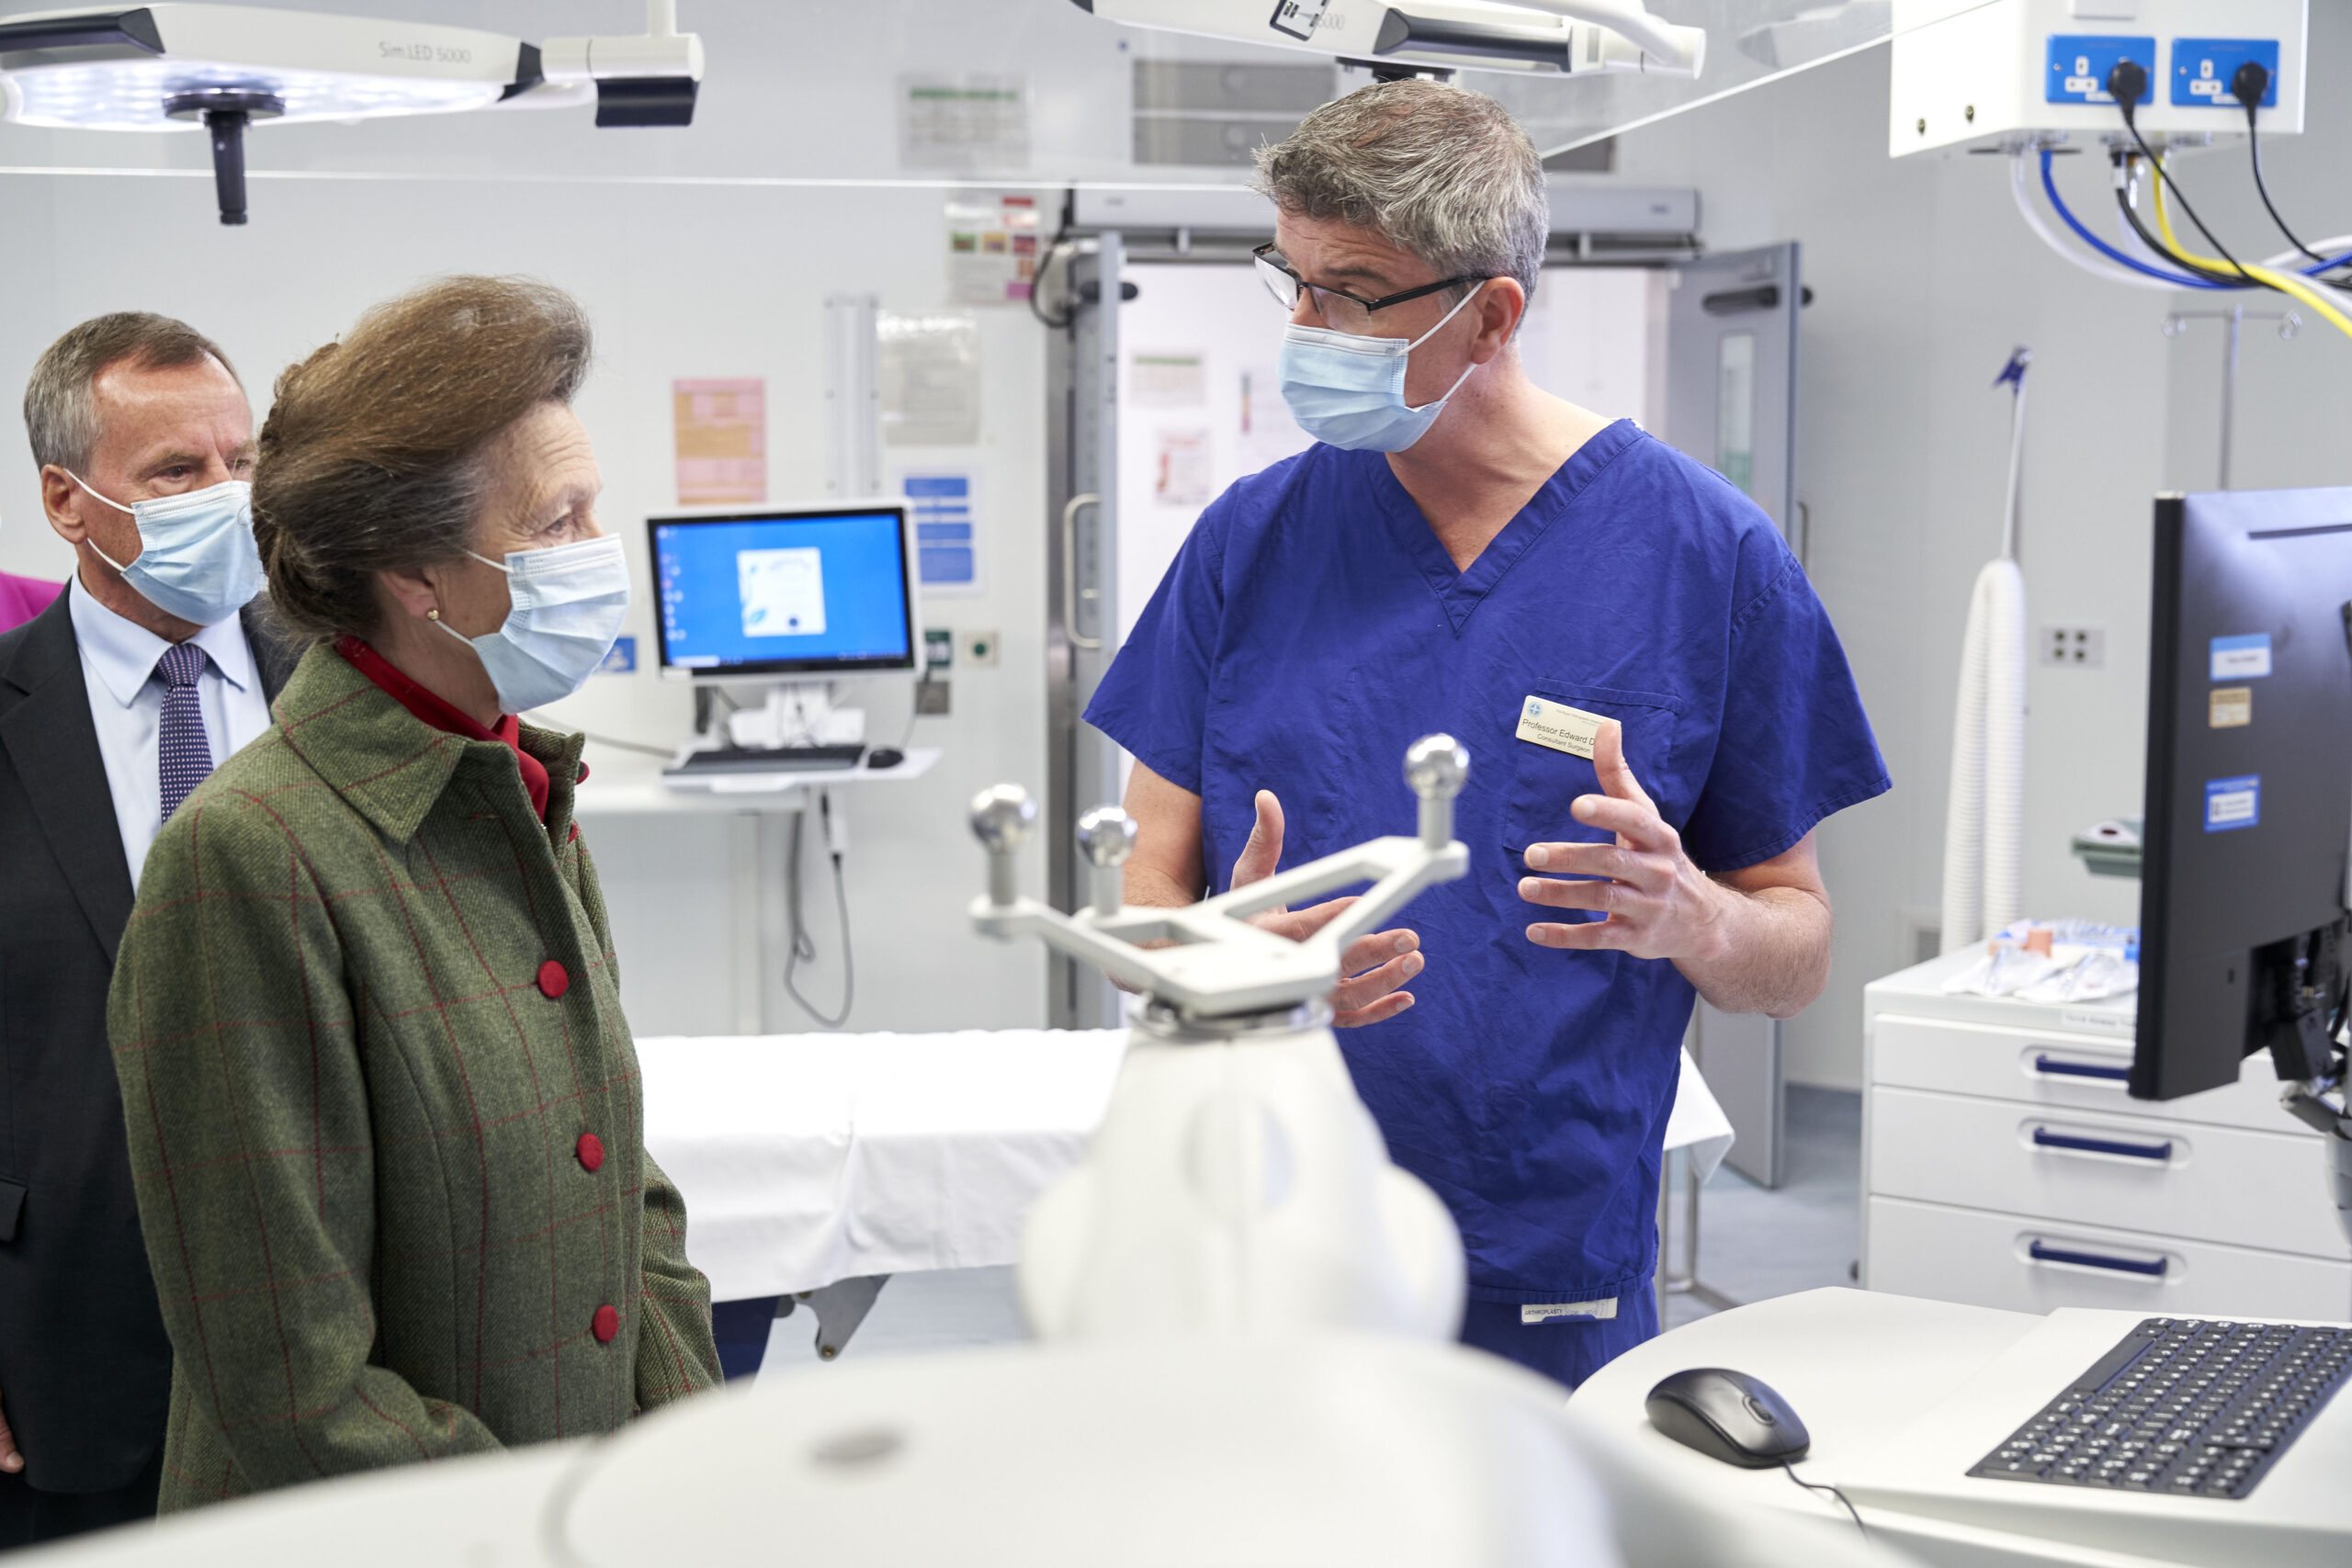 HRH The Princess Royal Officially Opens Orthopaedic Complex at The Royal Orthopaedic Hospital